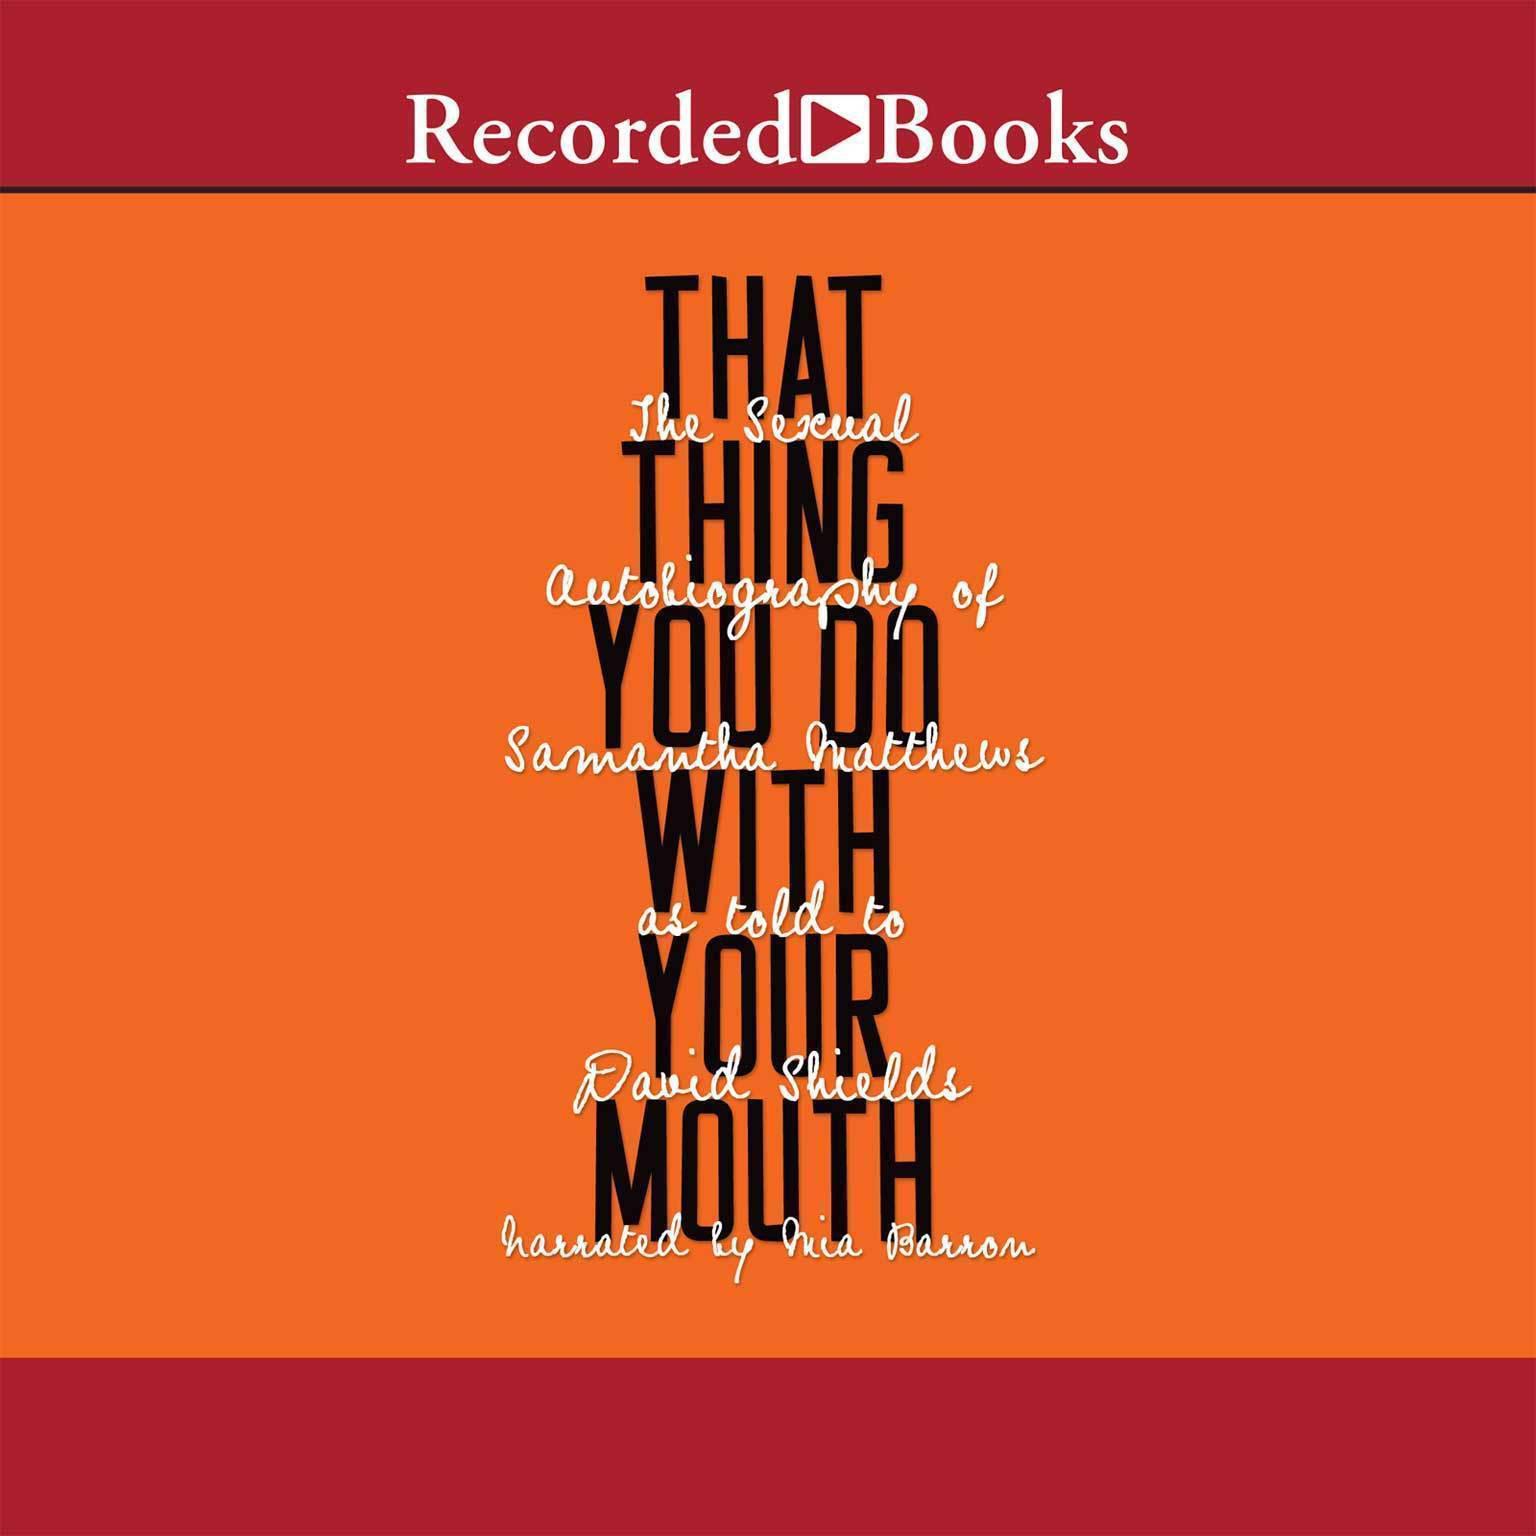 That Thing You Do with Your Mouth: The Sexual Autobiography of Samantha Matthews as Told to David Shields Audiobook, by David Shields